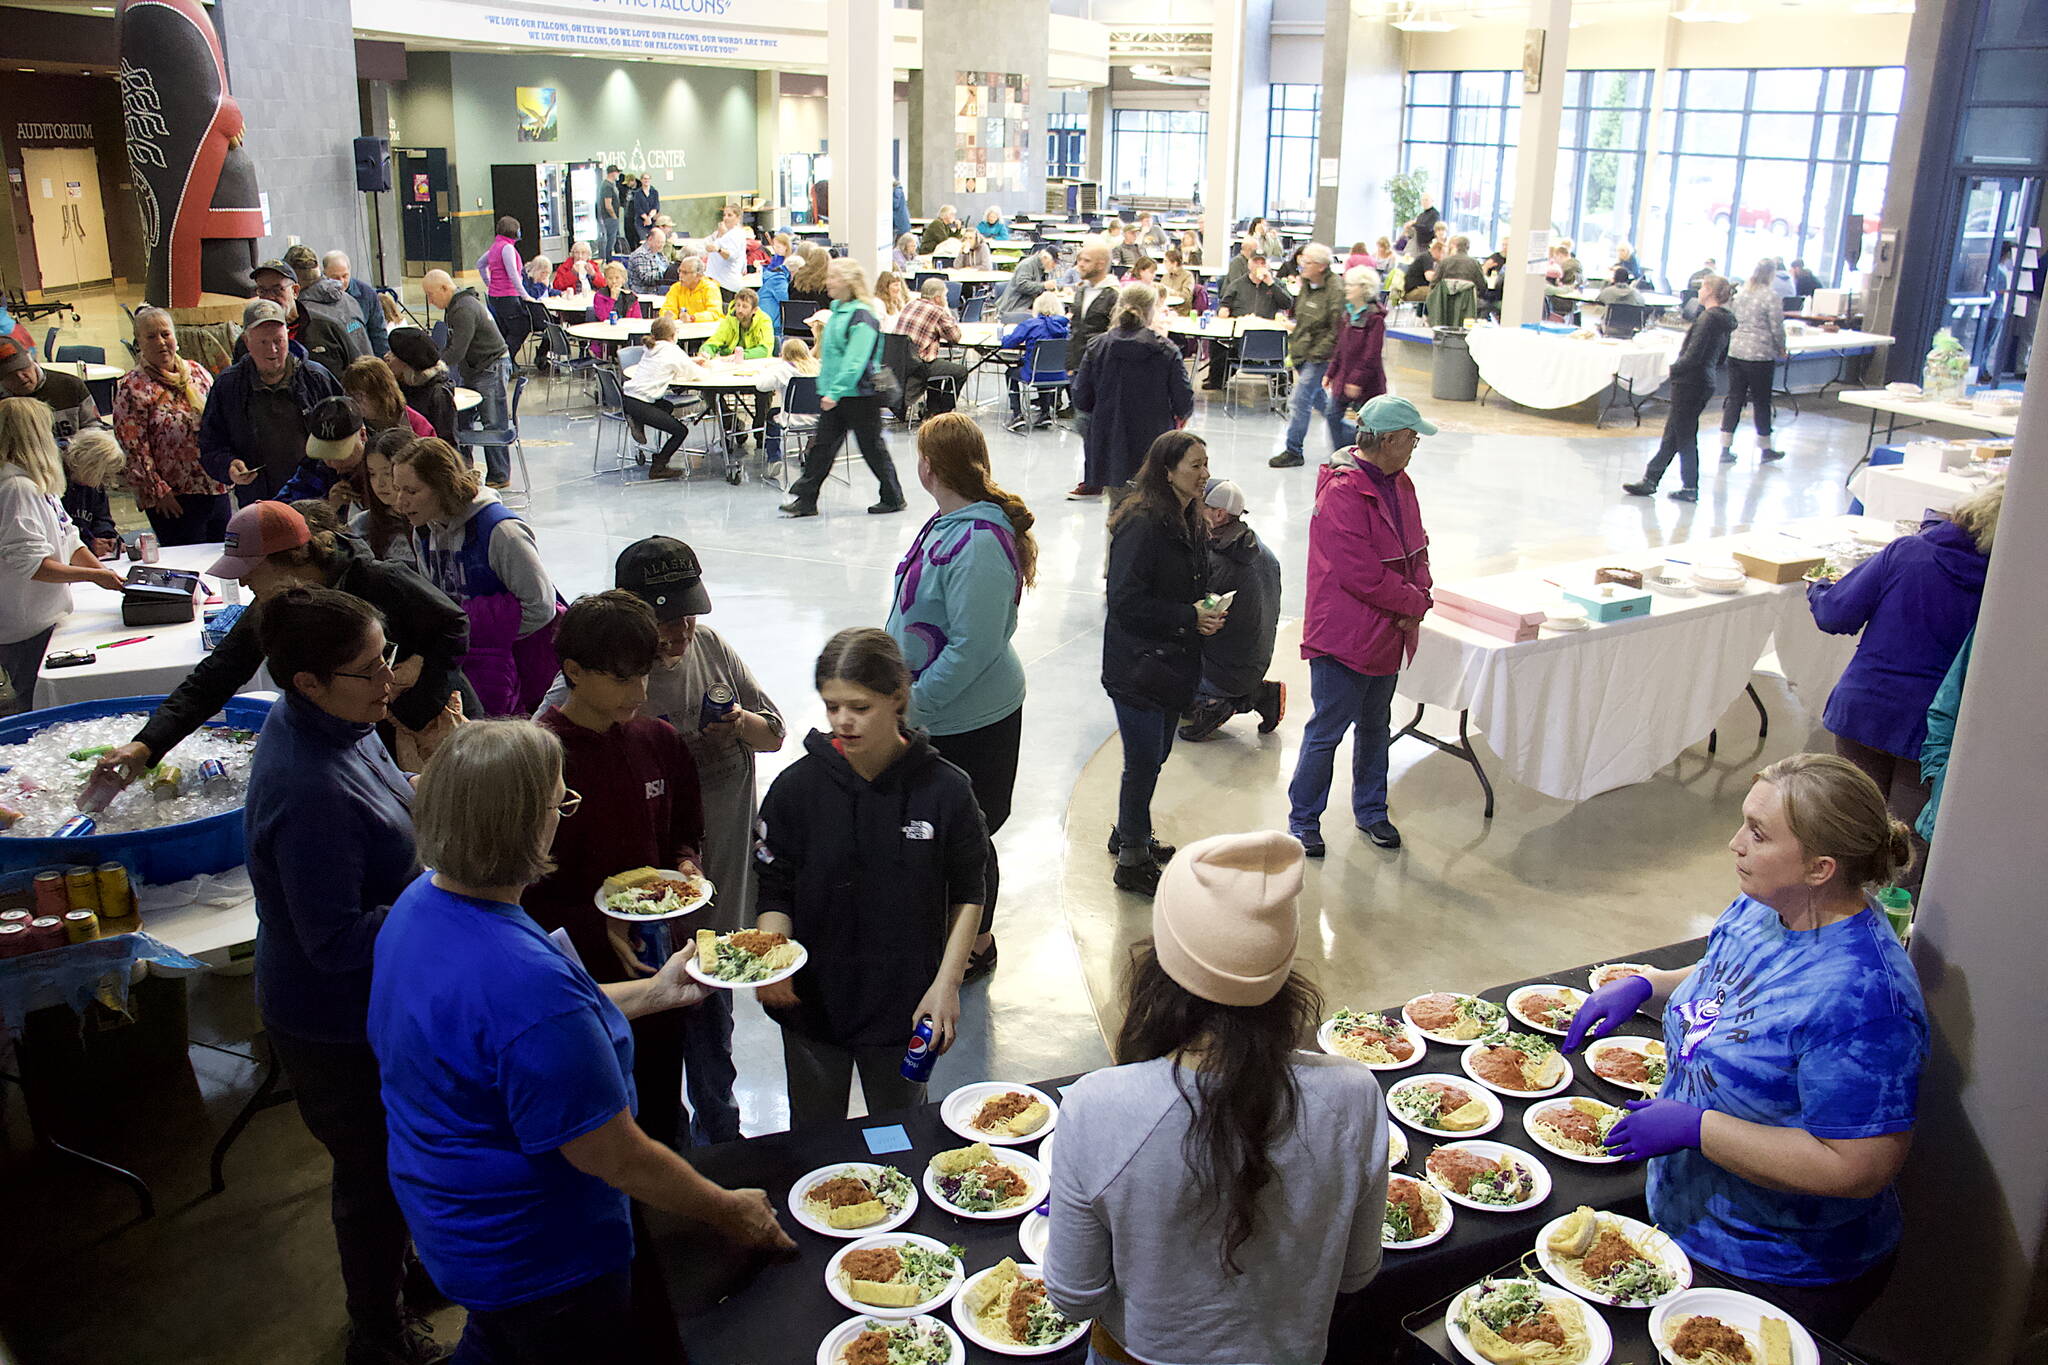 Hundreds of people participate in a spaghetti dinner and dessert auction Saturday night at Thunder Mountain High School to raise funds for residents affected by record flooding of the Mendenhall River earlier this month. More than $20,000 was raised during the event. (Mark Sabbatini / Juneau Empire)